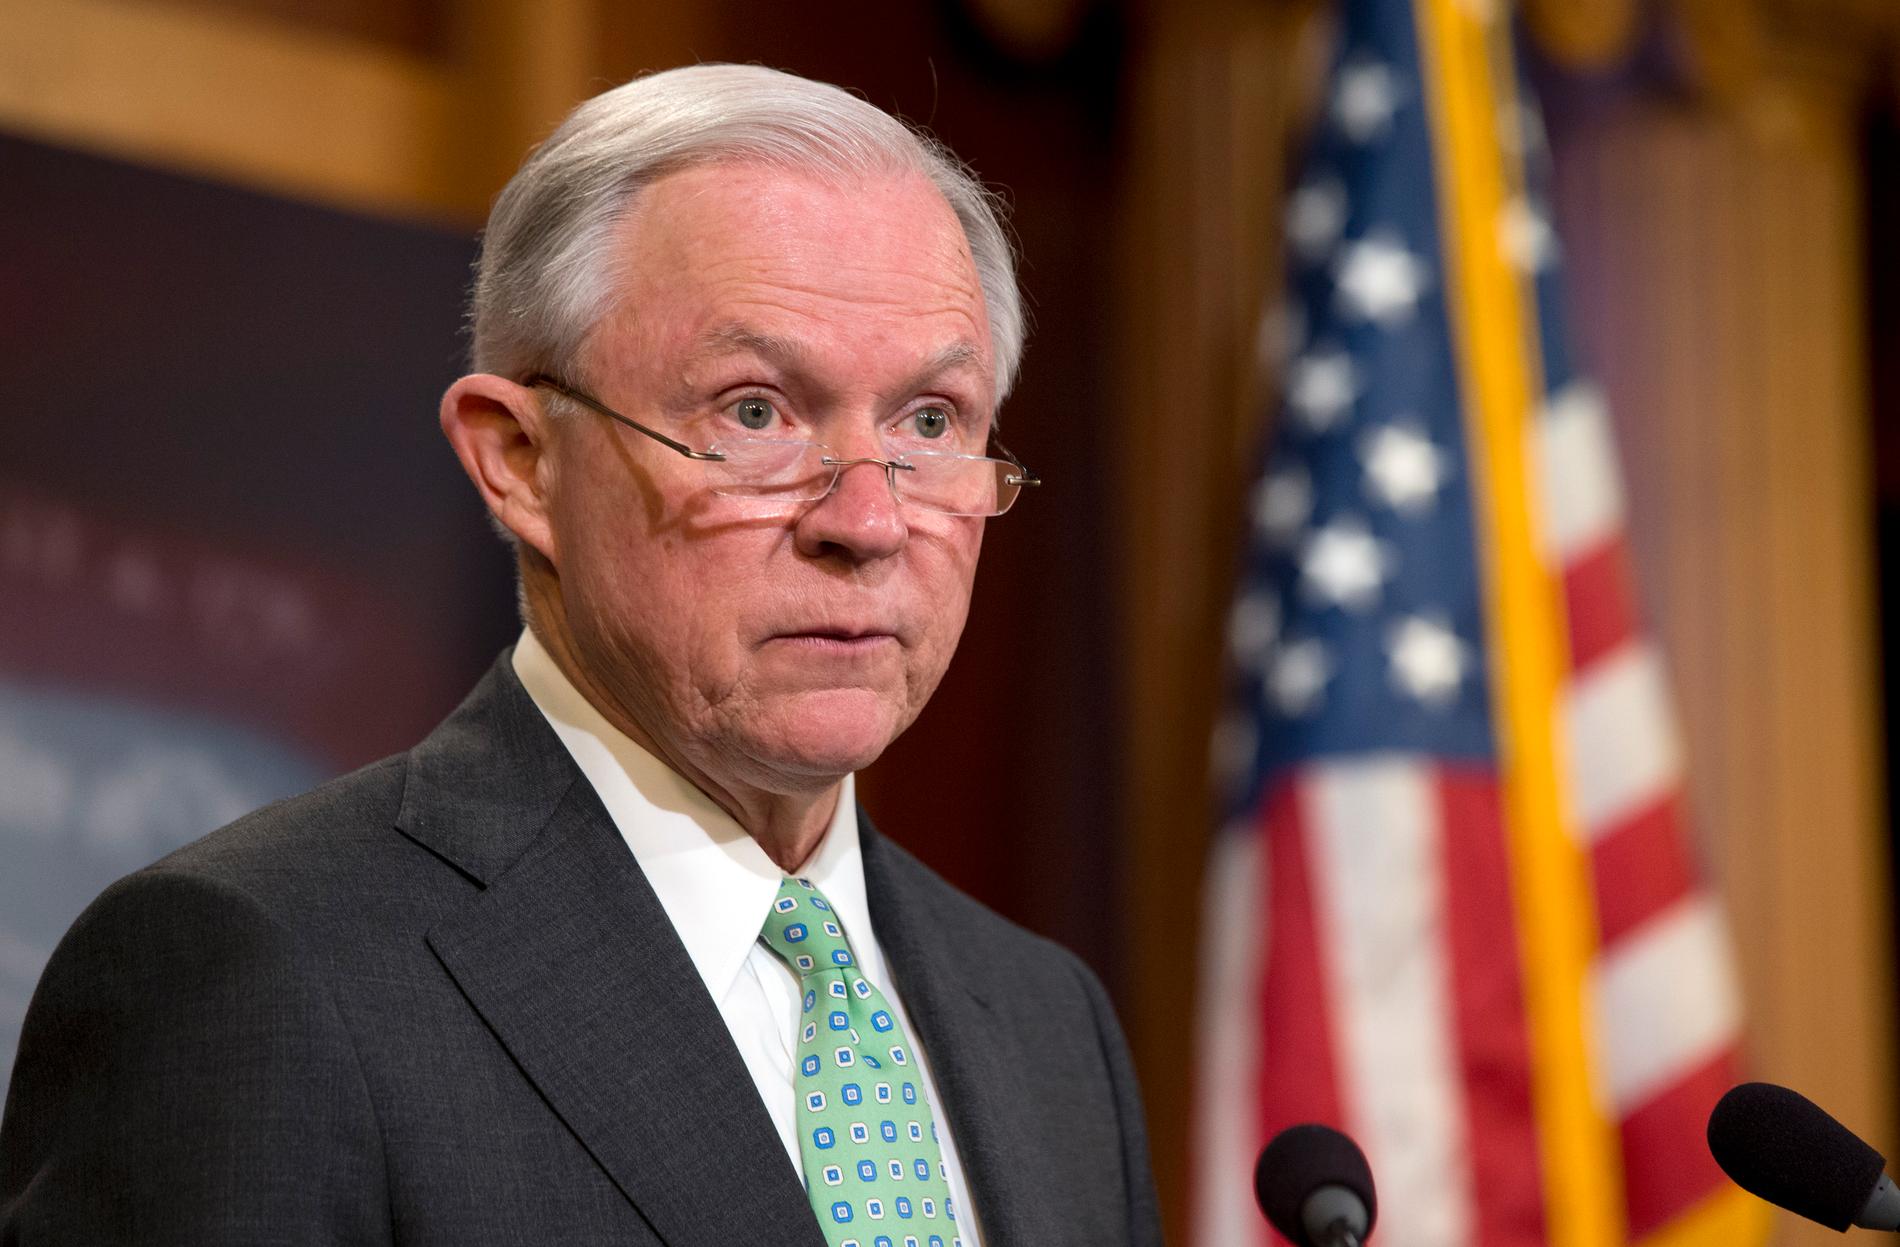 USA:s justitieminister Jeff Sessions.